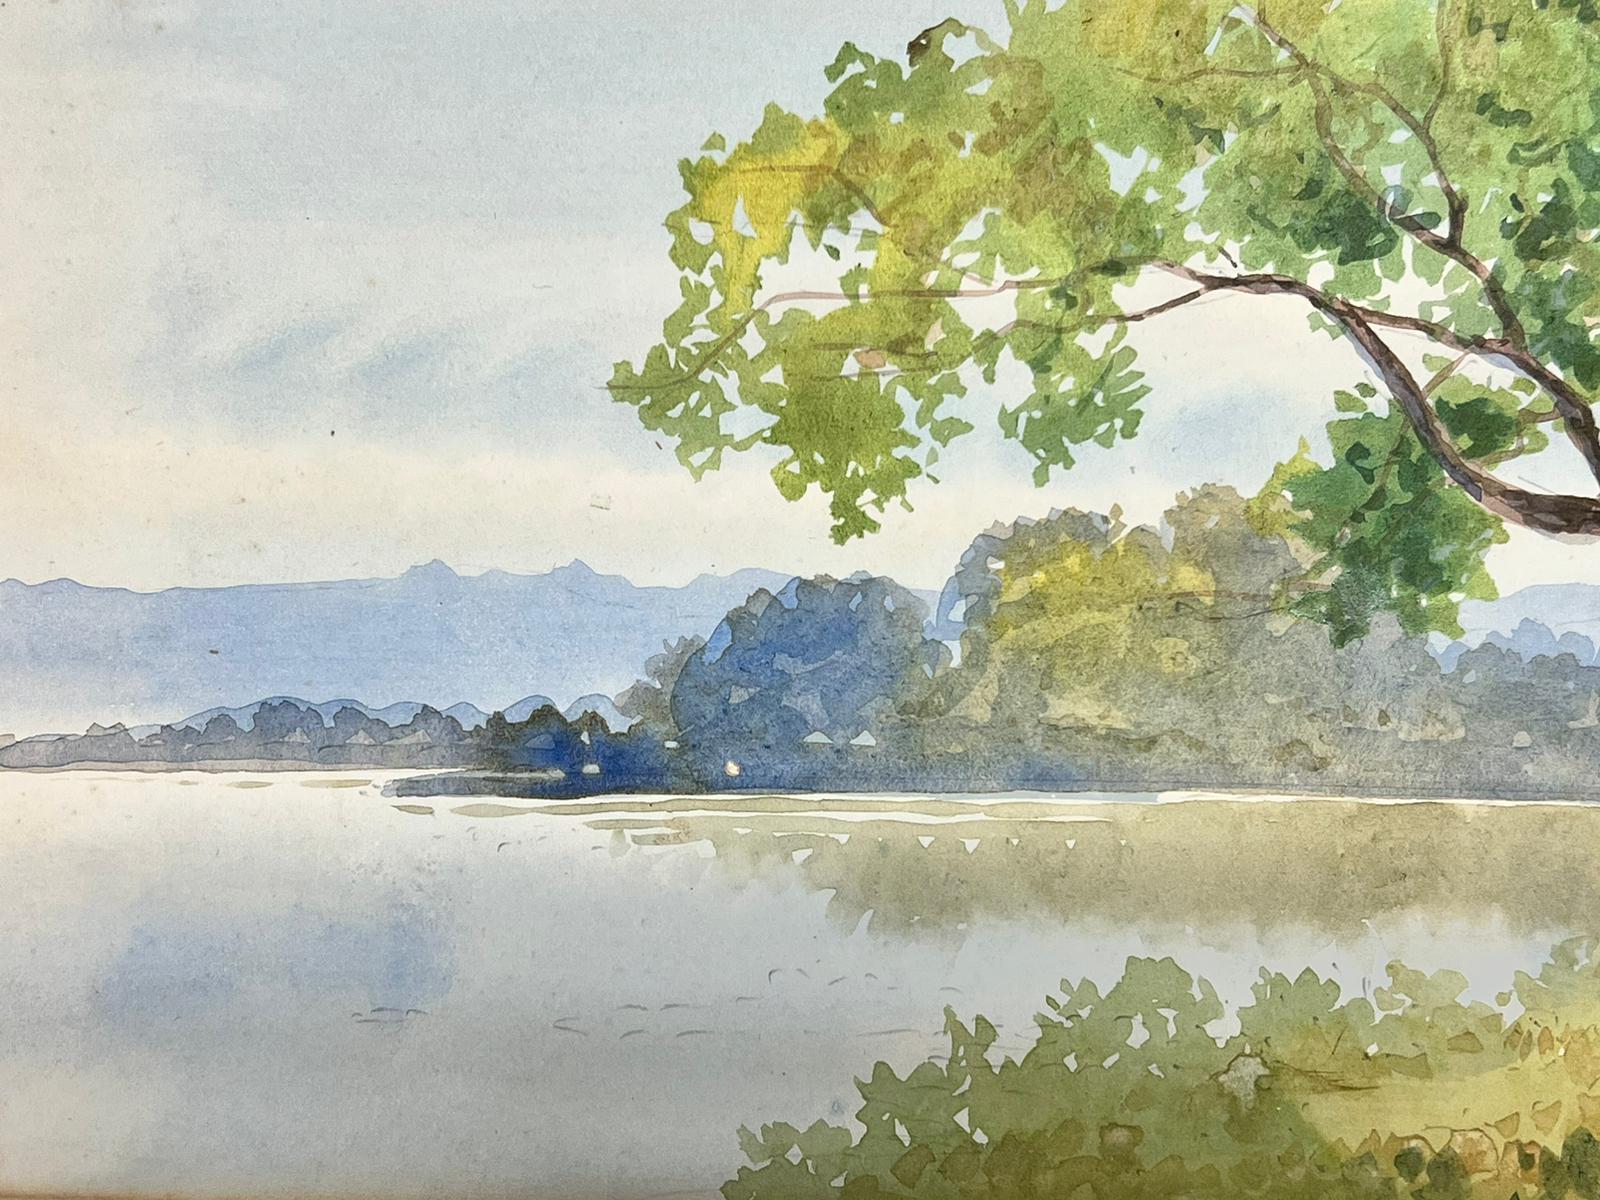 Chinese artist, signed
Early 20th century watercolour on paper, unframed
size: 6 x 19 inches
private collection, England 
The painting is in overall very good and sound condition, age related surface marks, stains
 